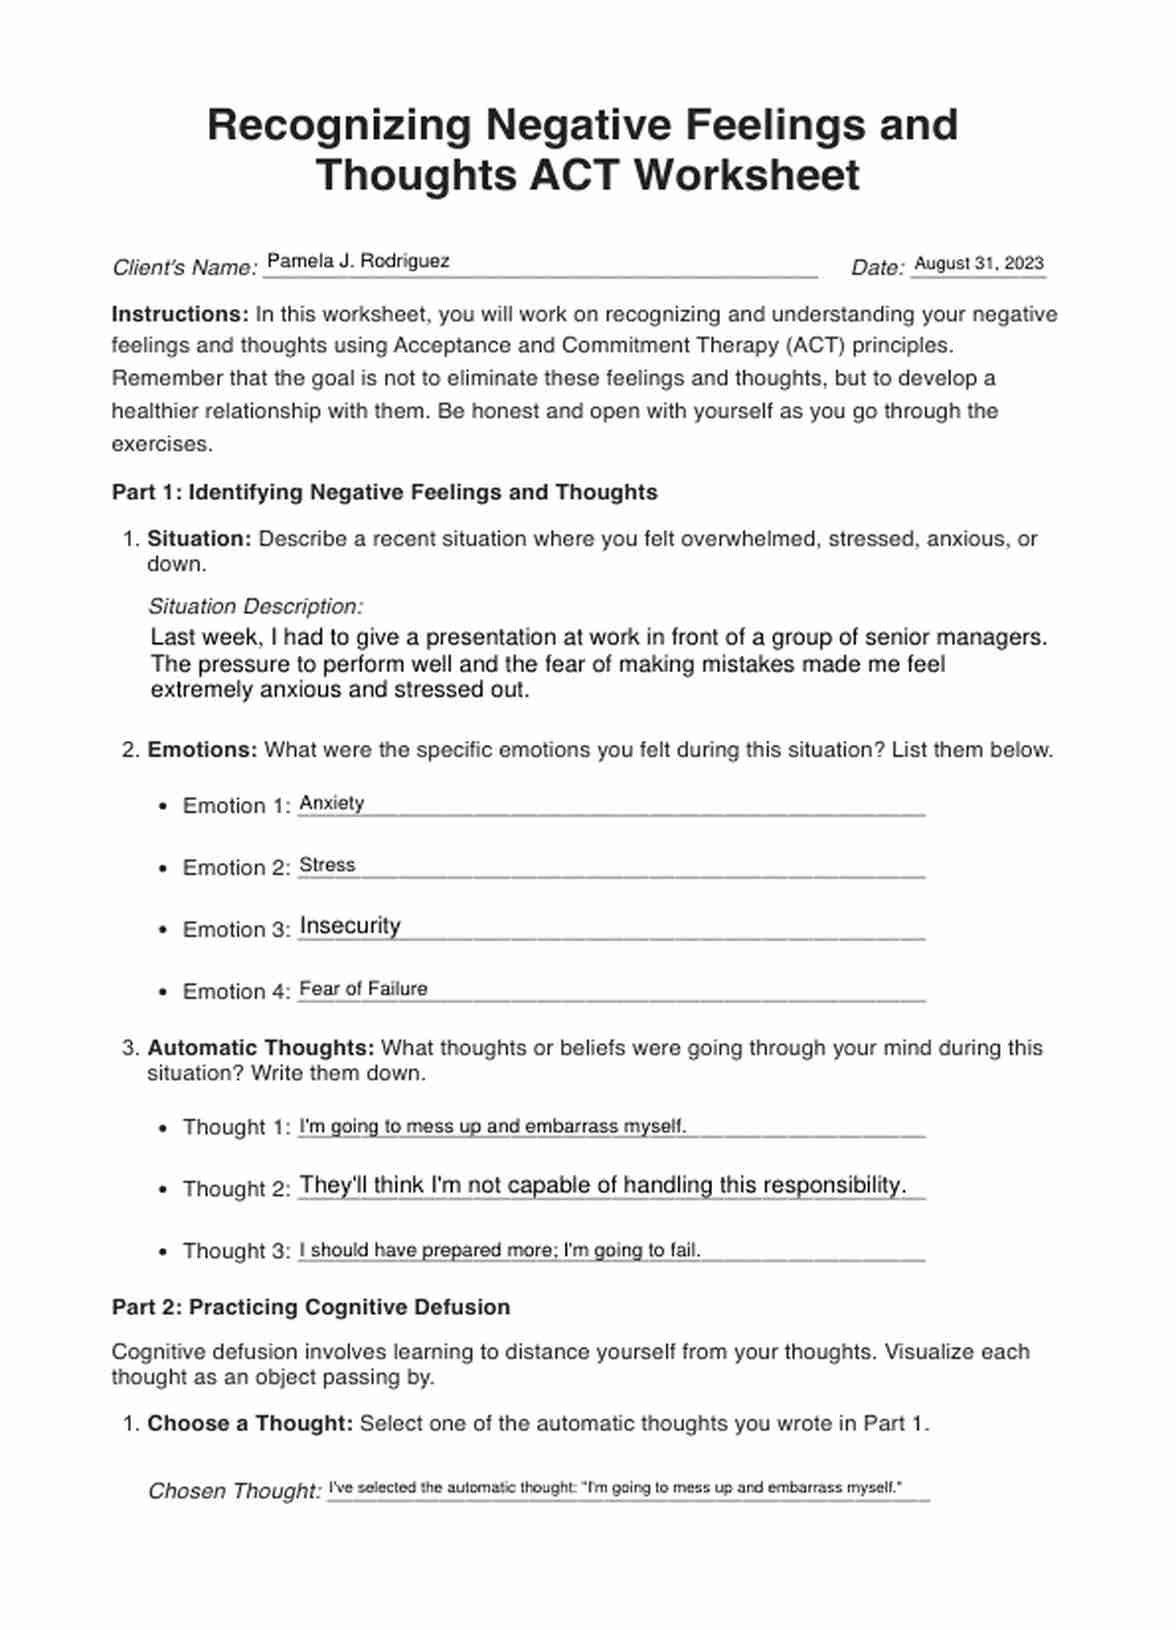 Recognizing Negative Feelings and Thoughts ACT Worksheet PDF Example